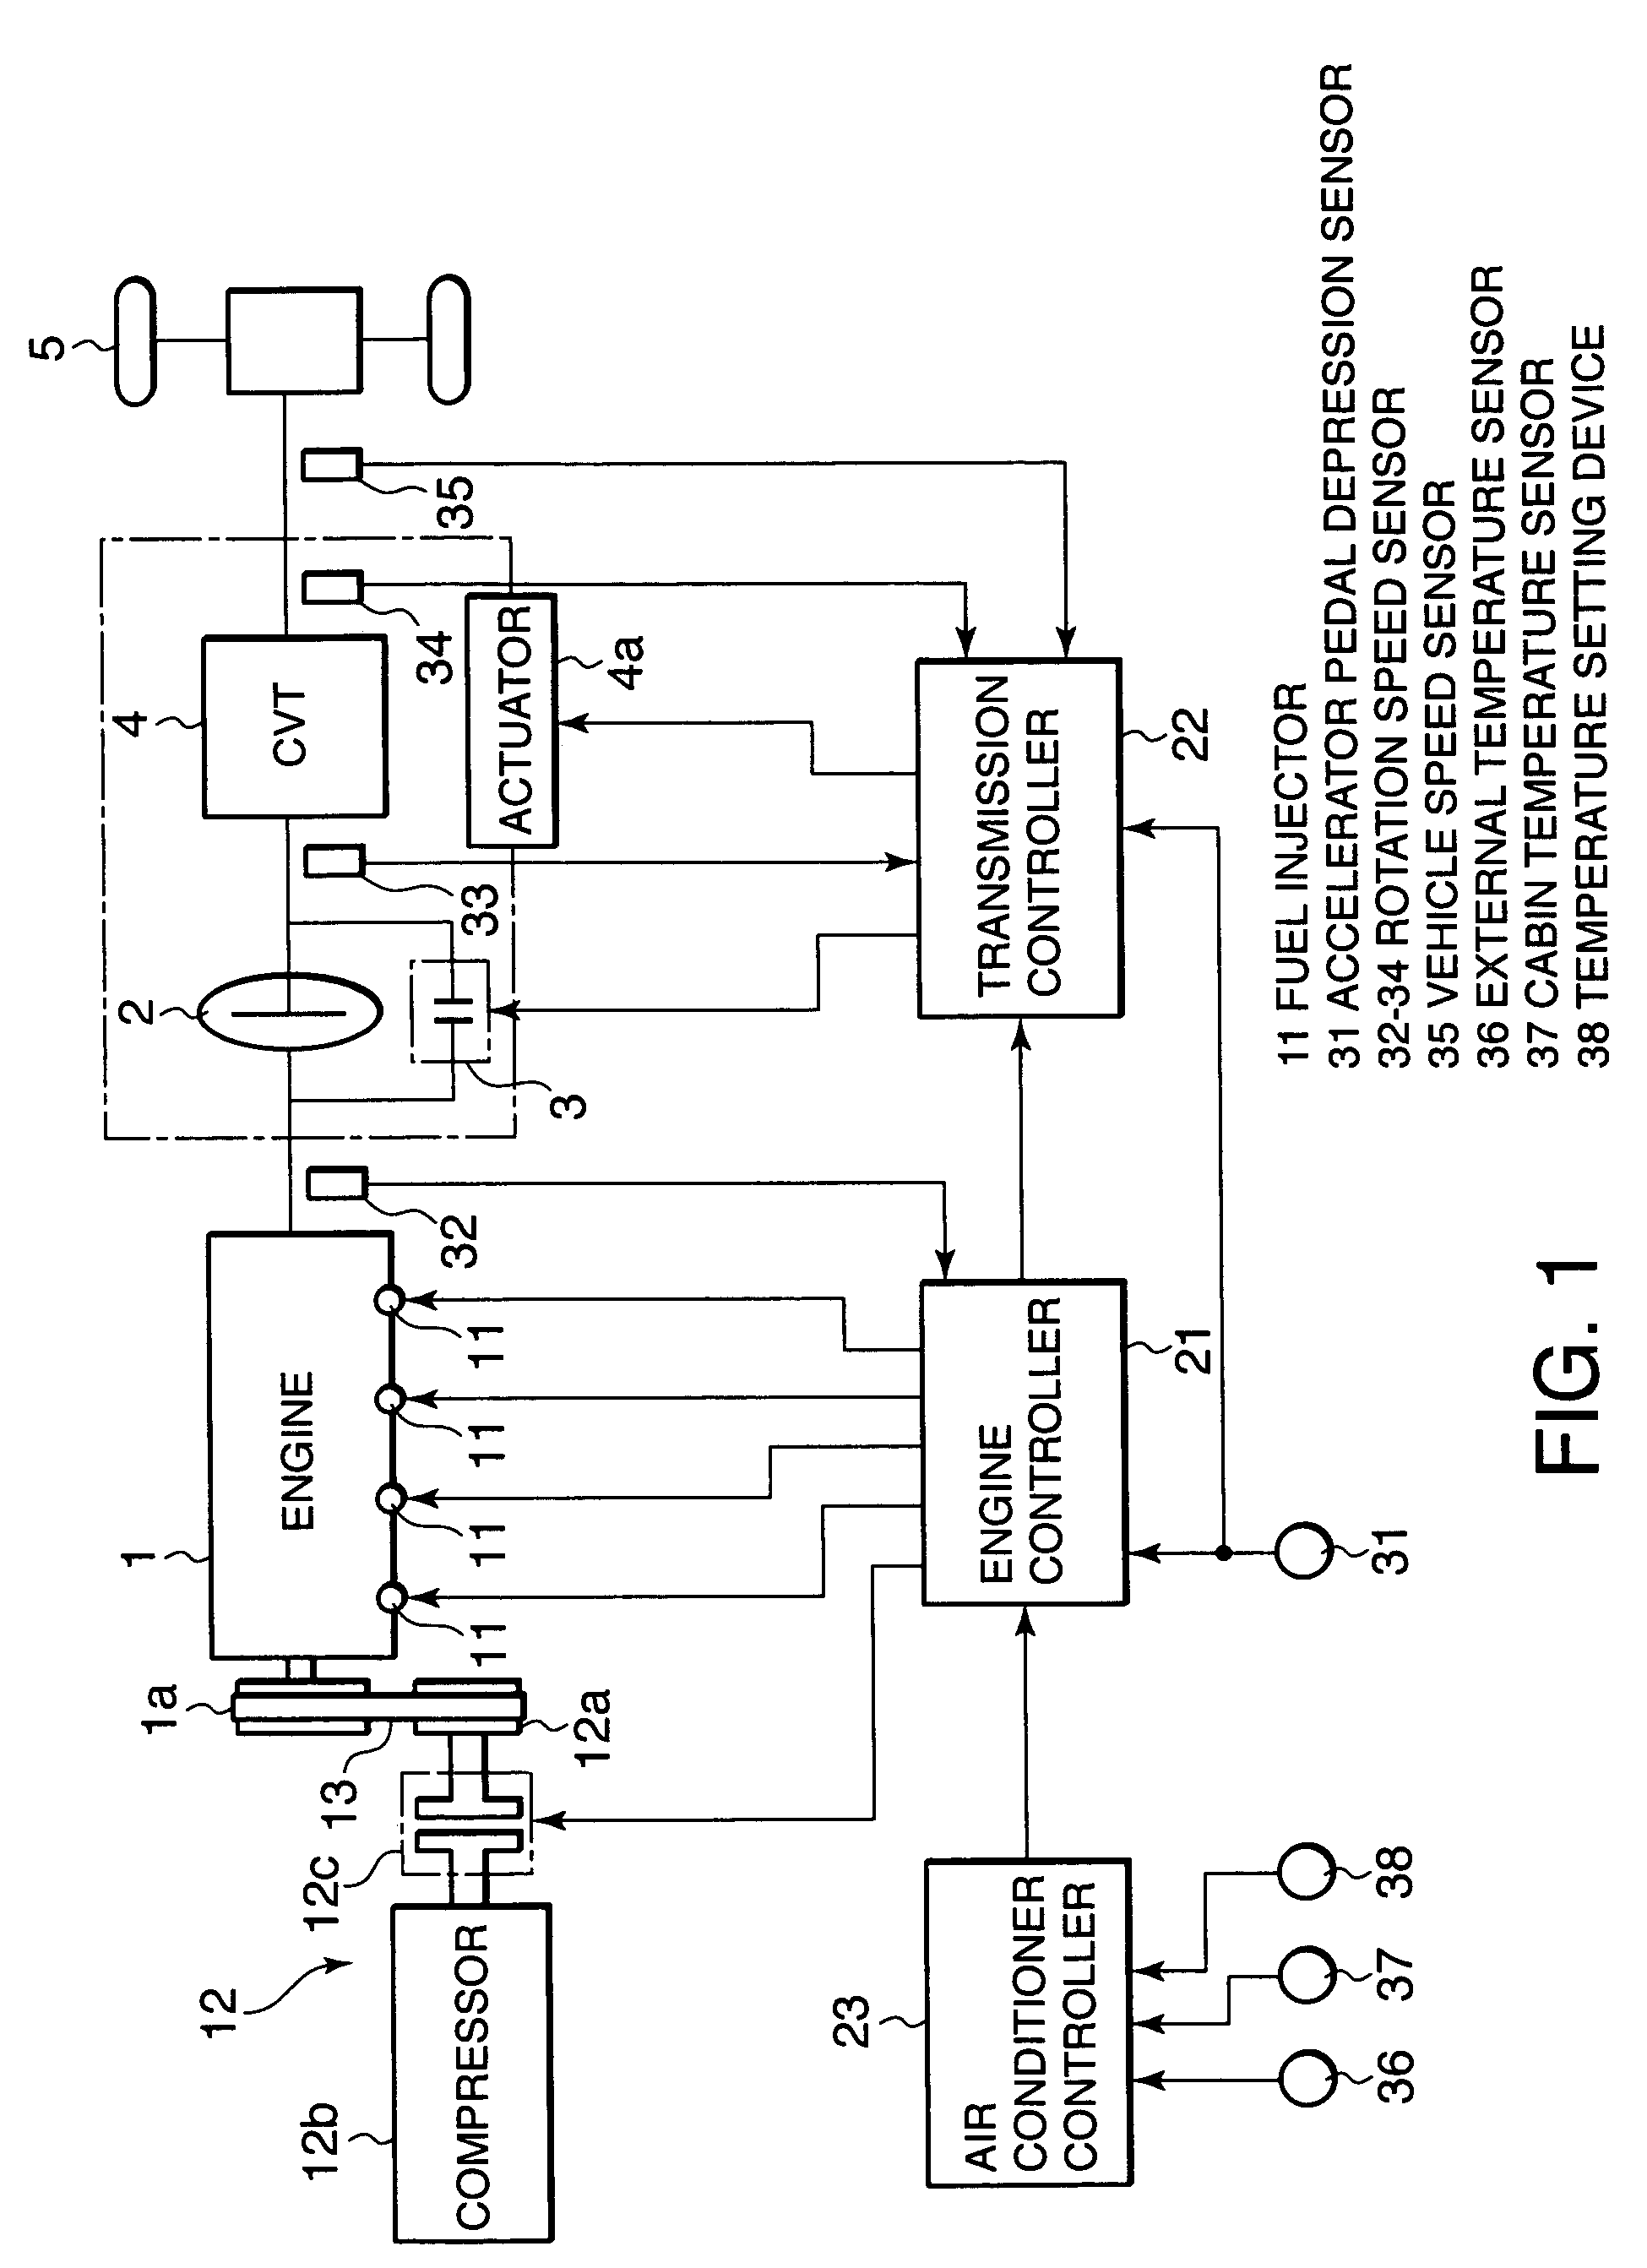 Control of vehicle drive system